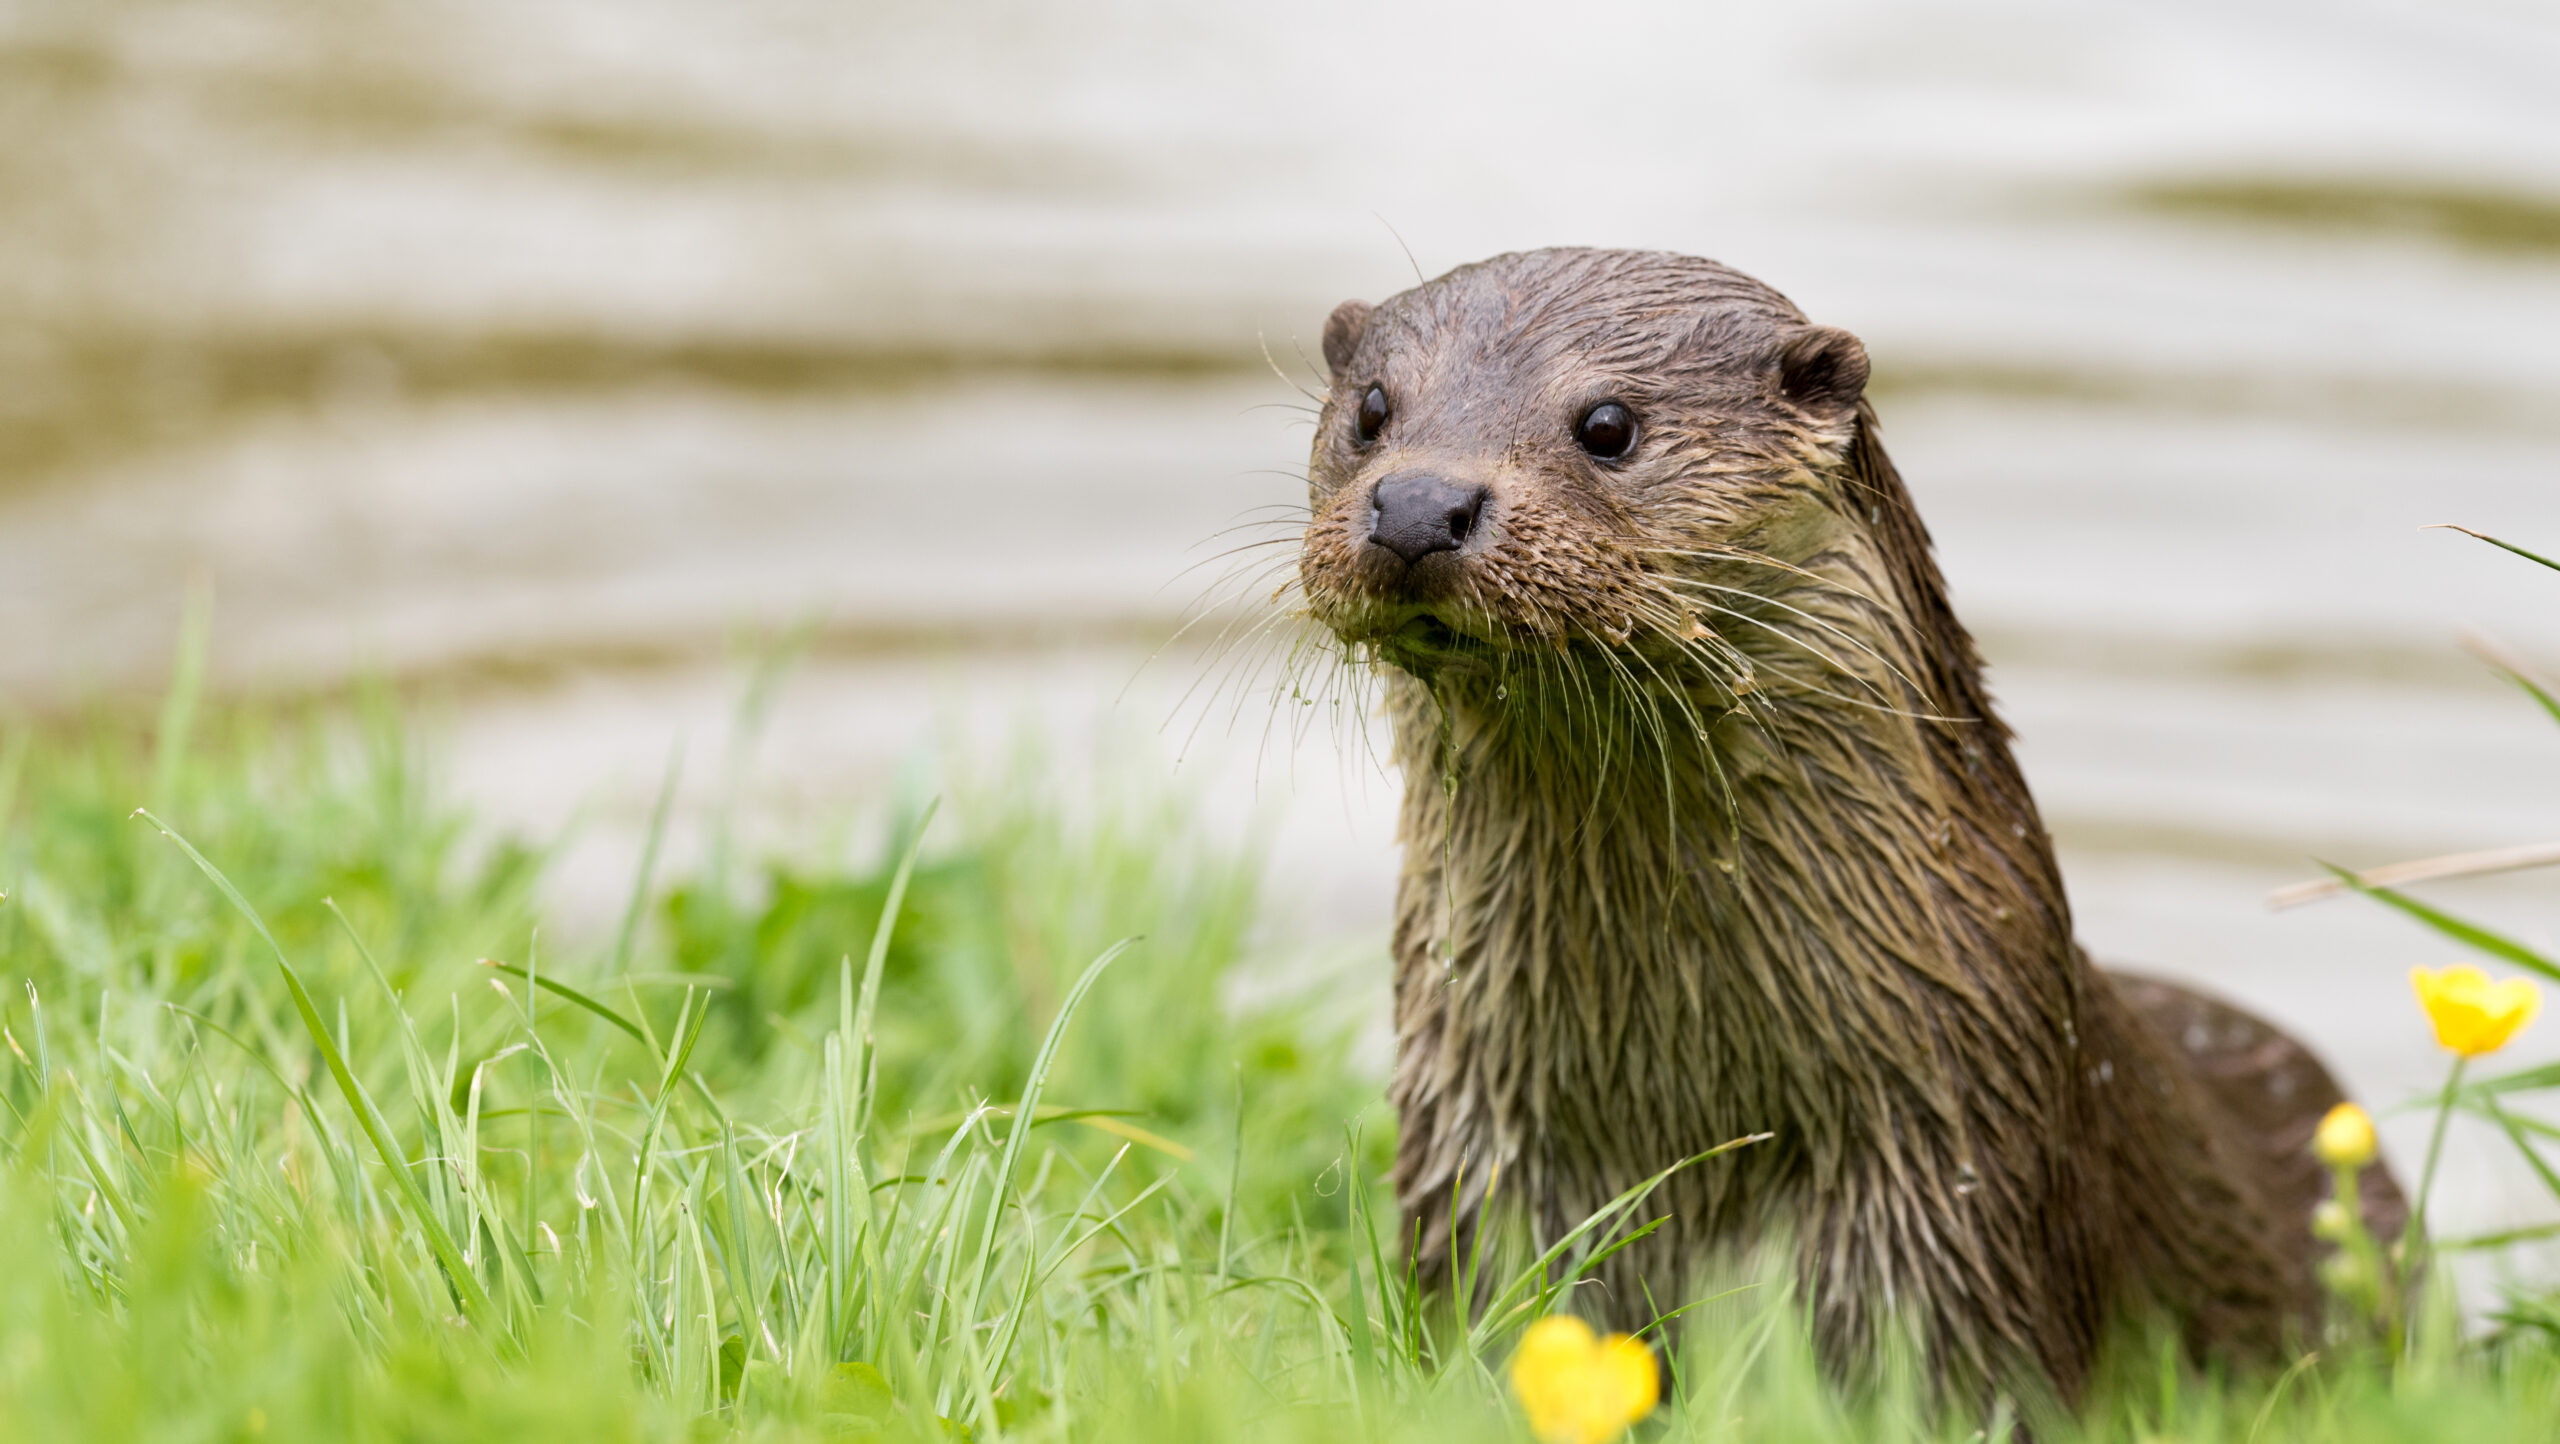 Children’s Literature, ecocriticism and the case of Tarka the Otter